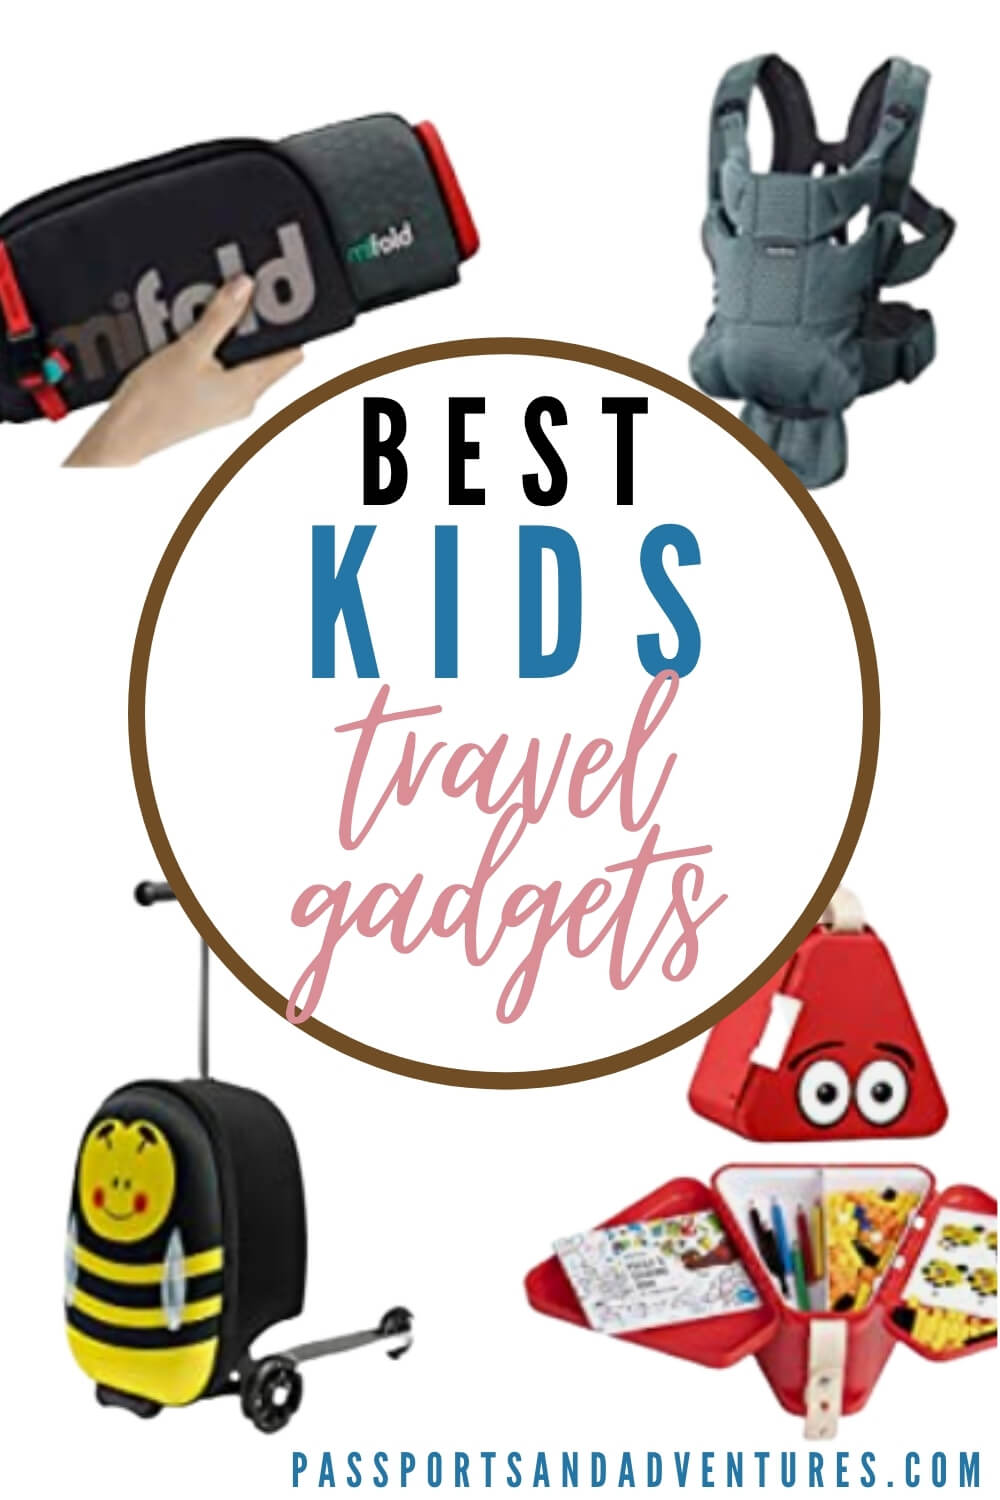 best travel gadgets for toddlers